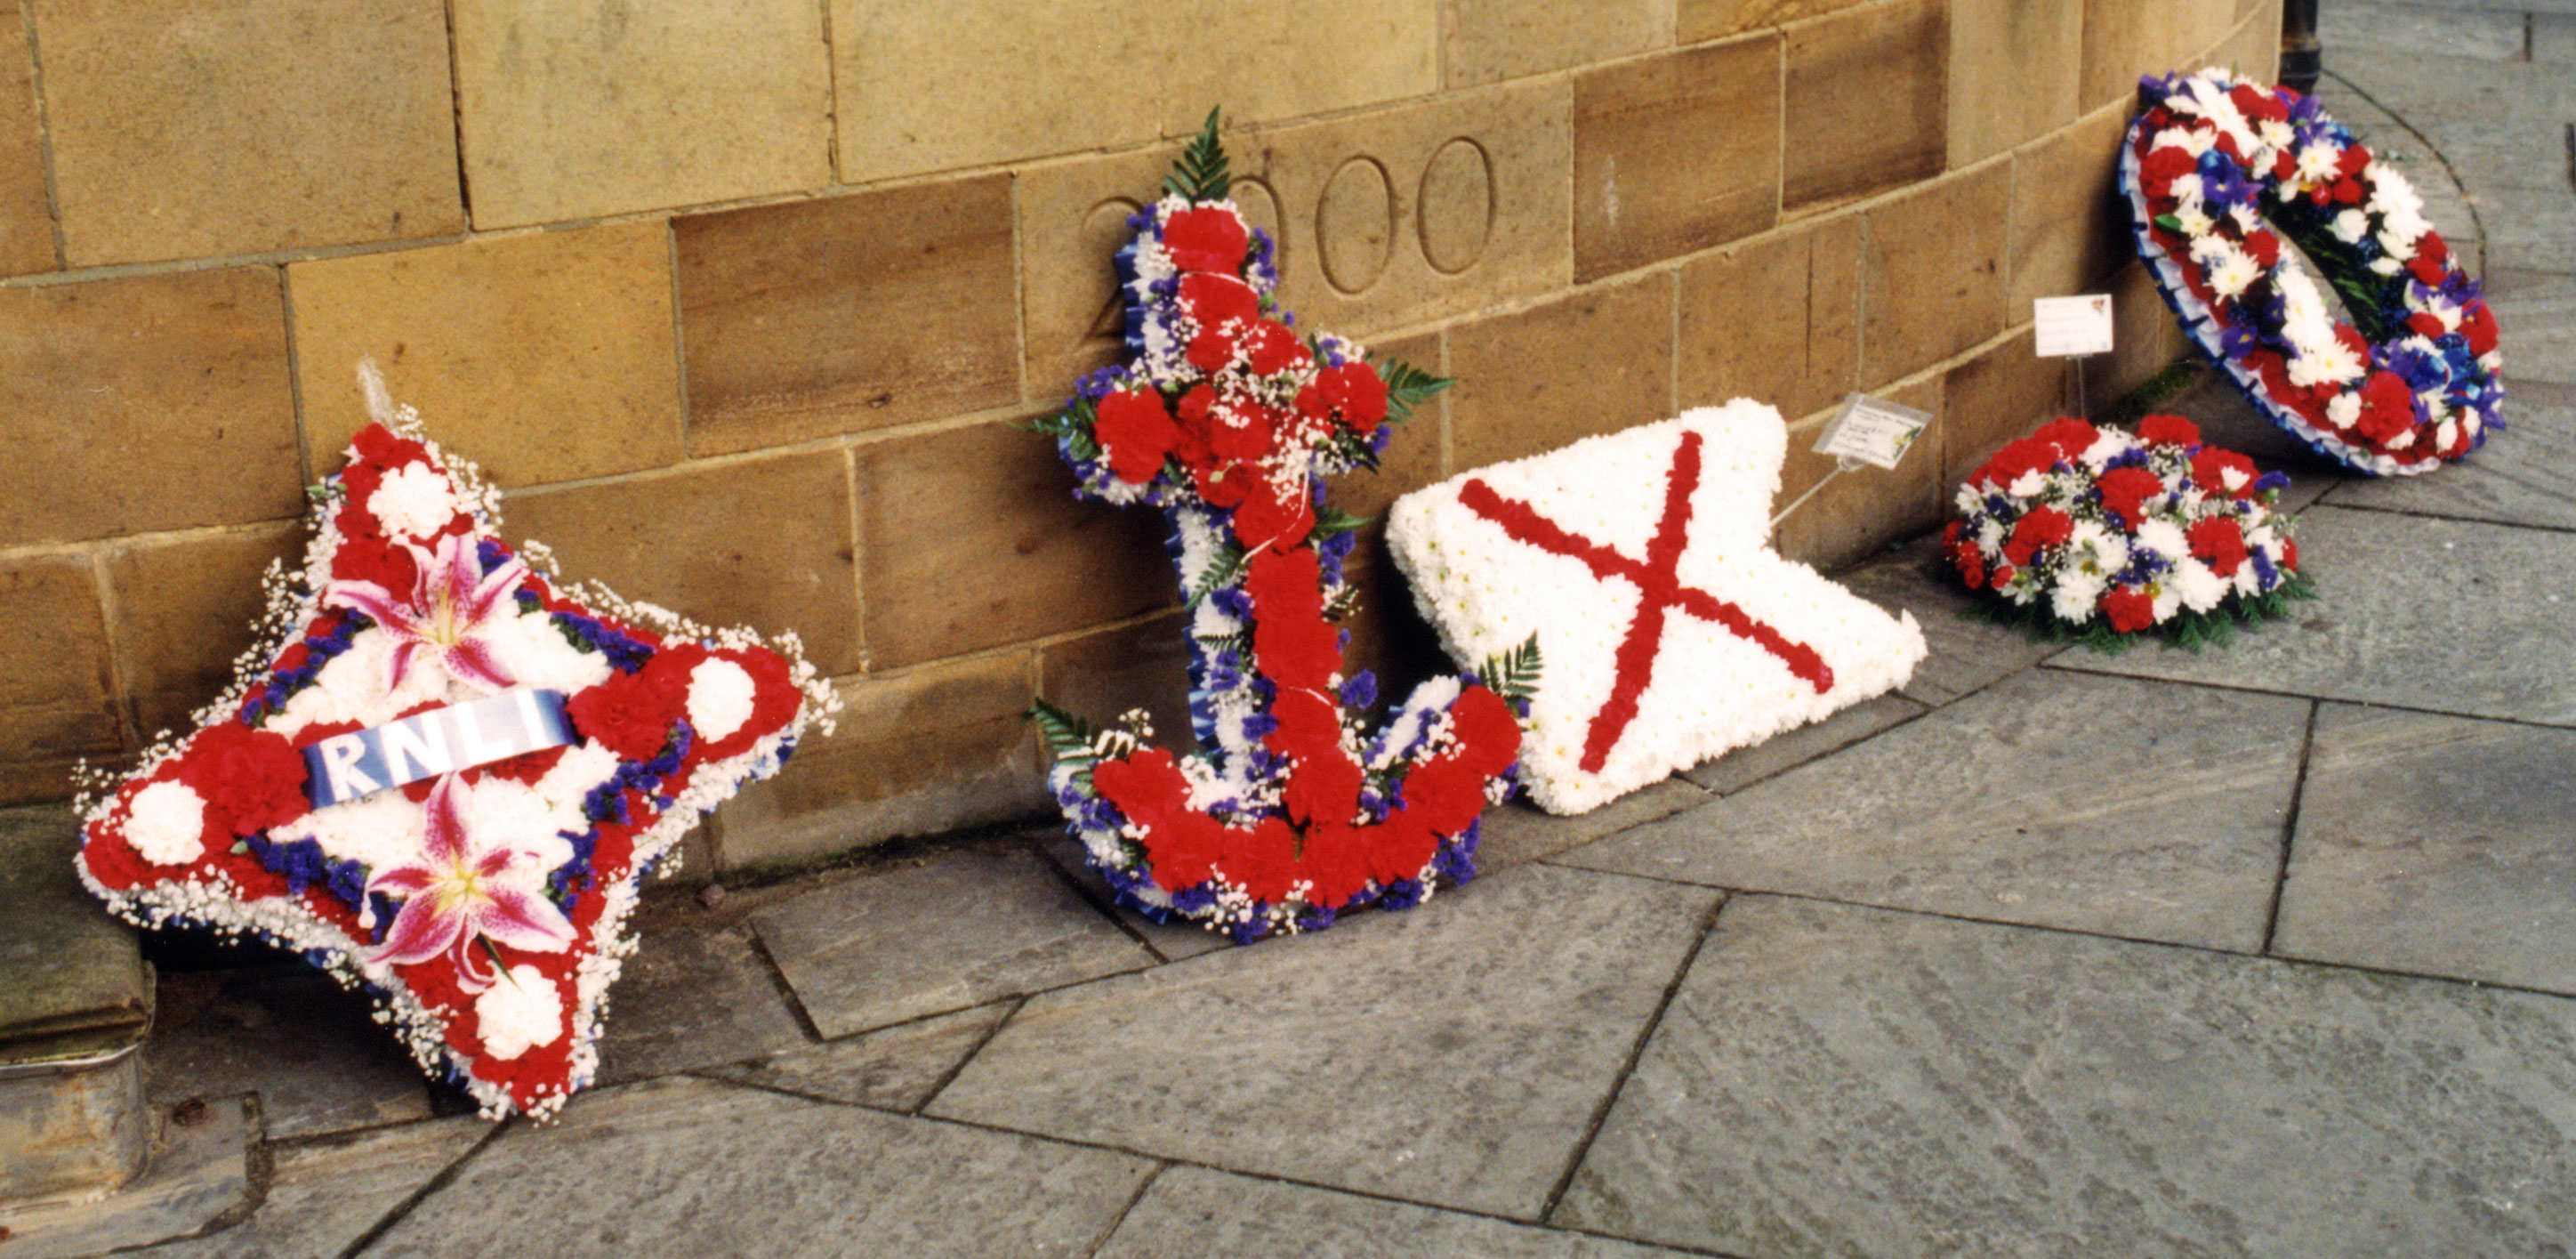 The Wreaths On Display